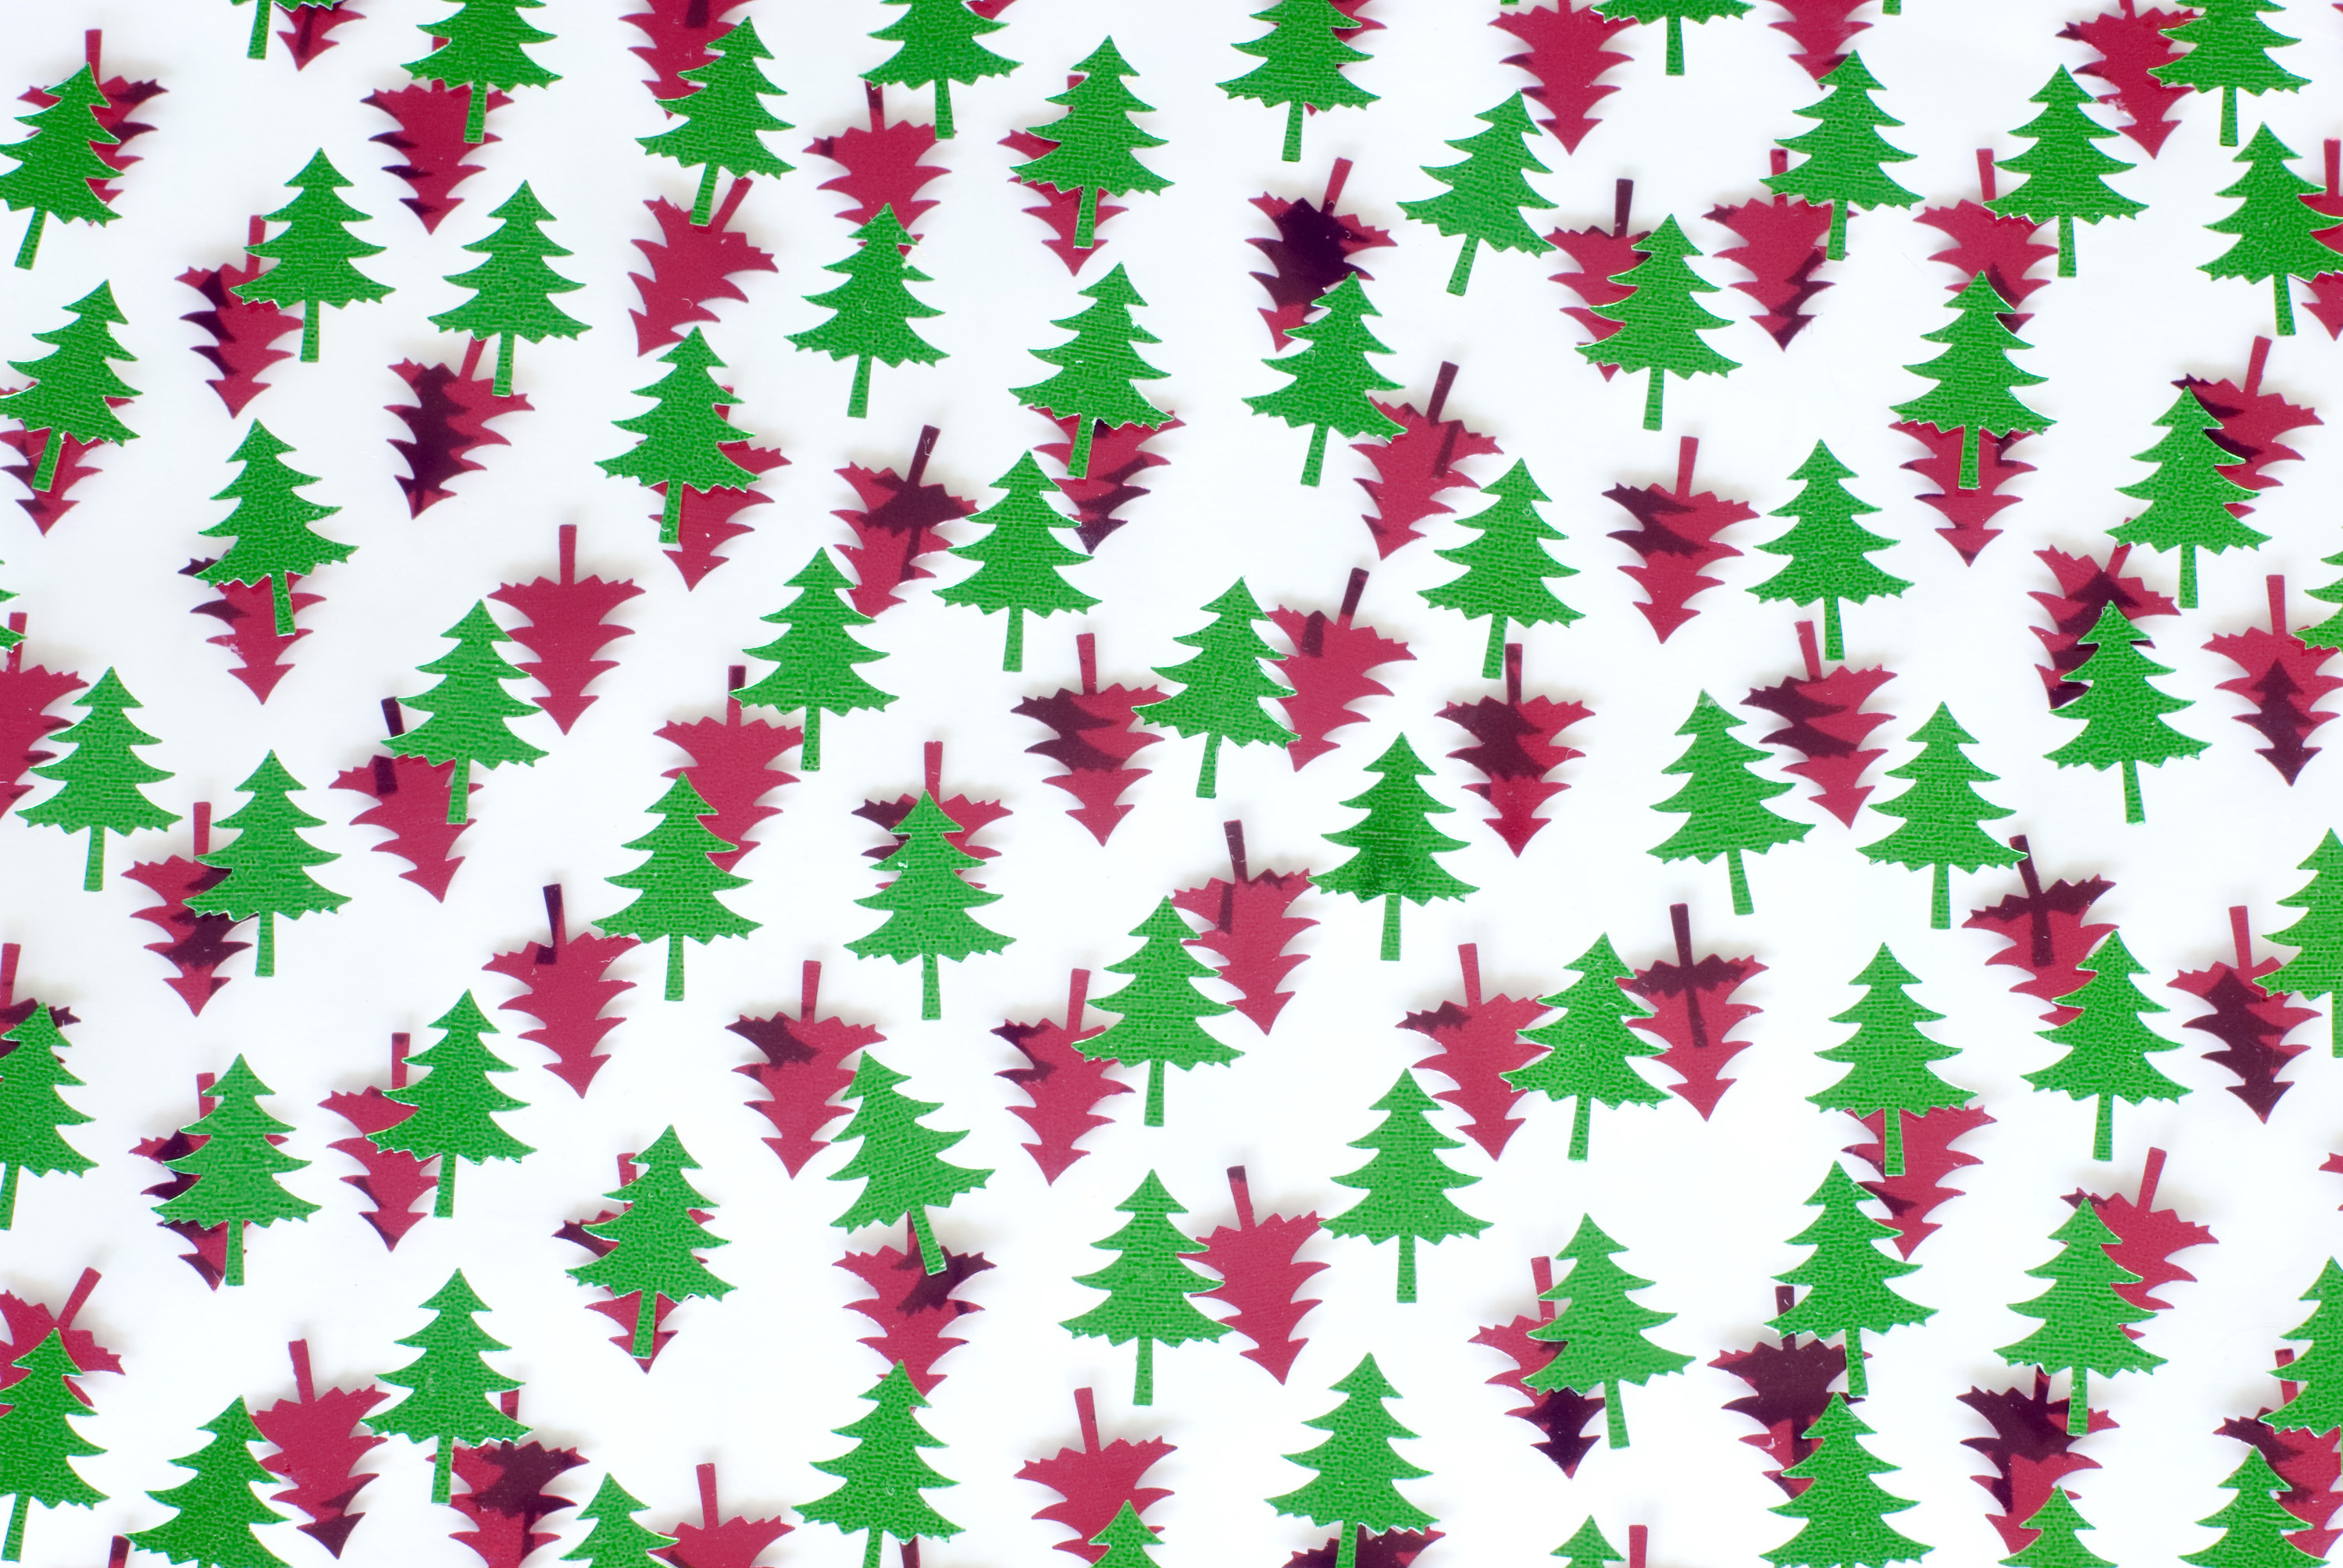 3000x2008 a festive themed background of red and green christmas pine tree shapes